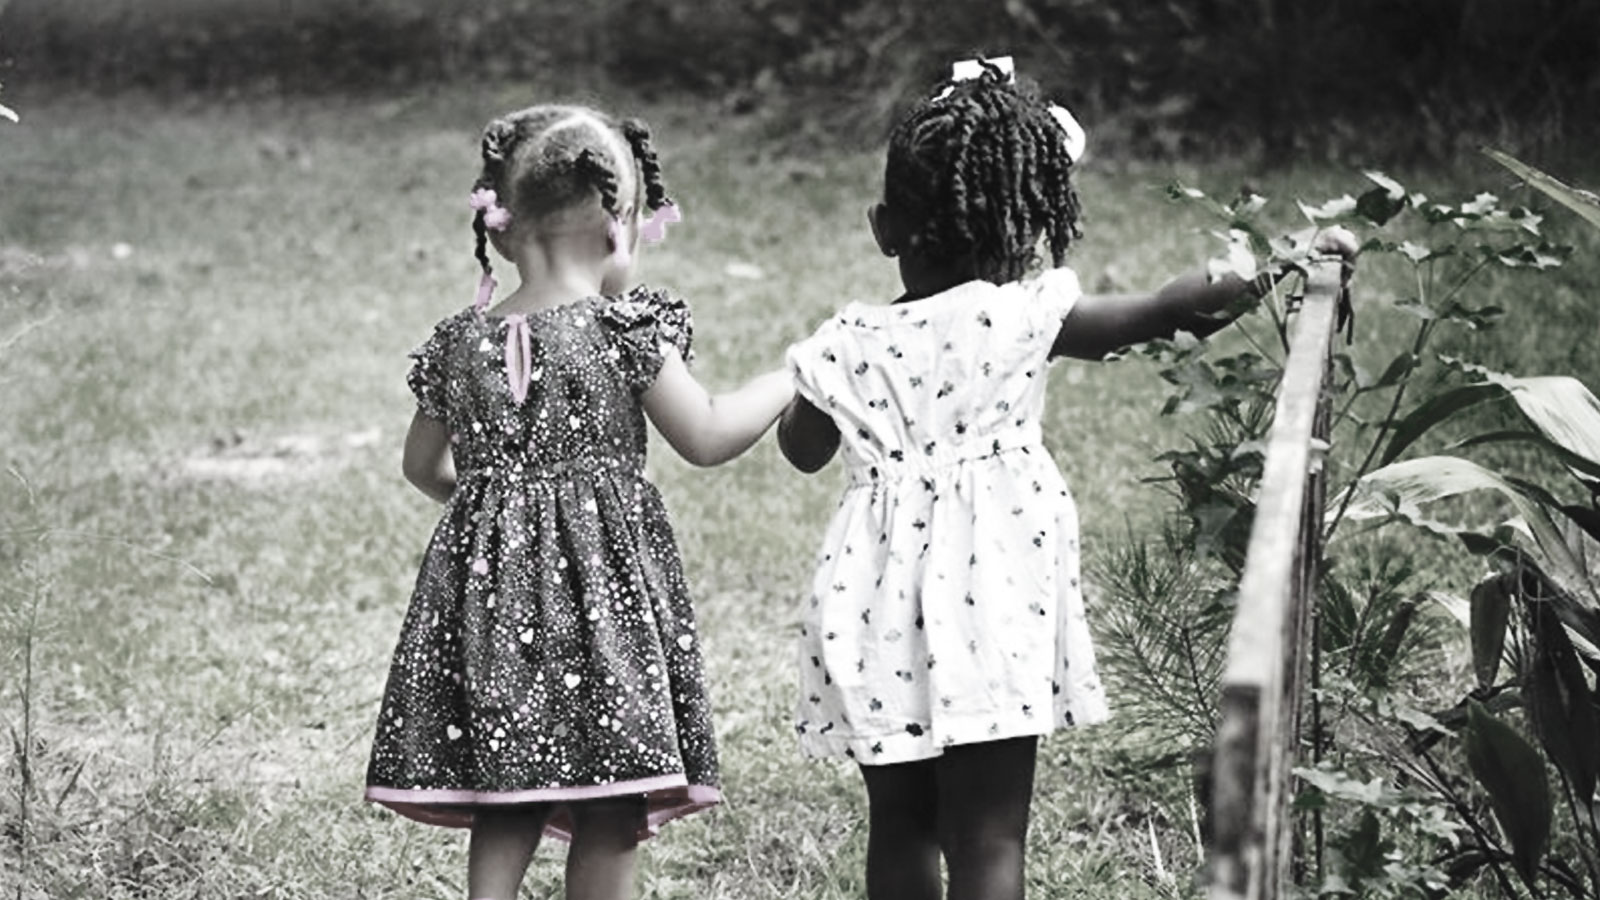 Supporting children's mental health. A photo of Two young girls holding hands